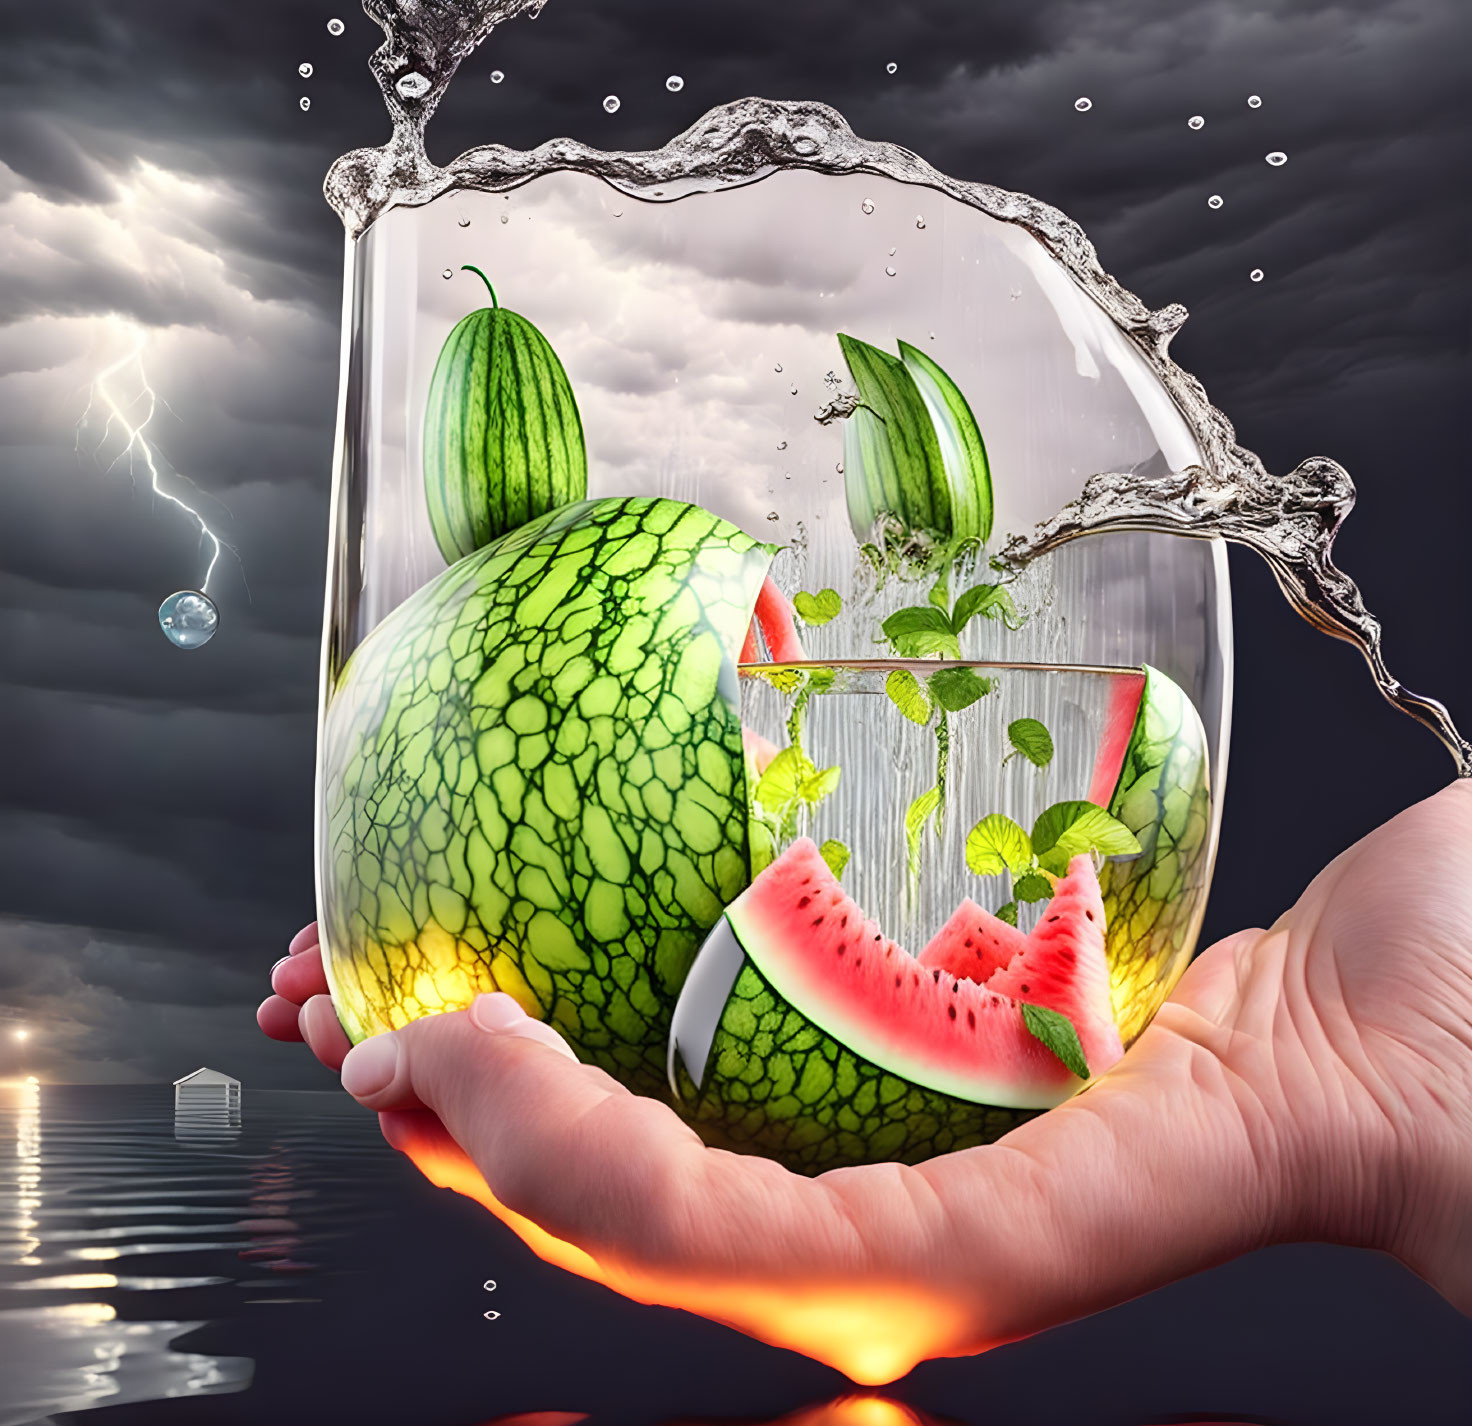 Flooding in a glass watermelon, photorealistic, Dr